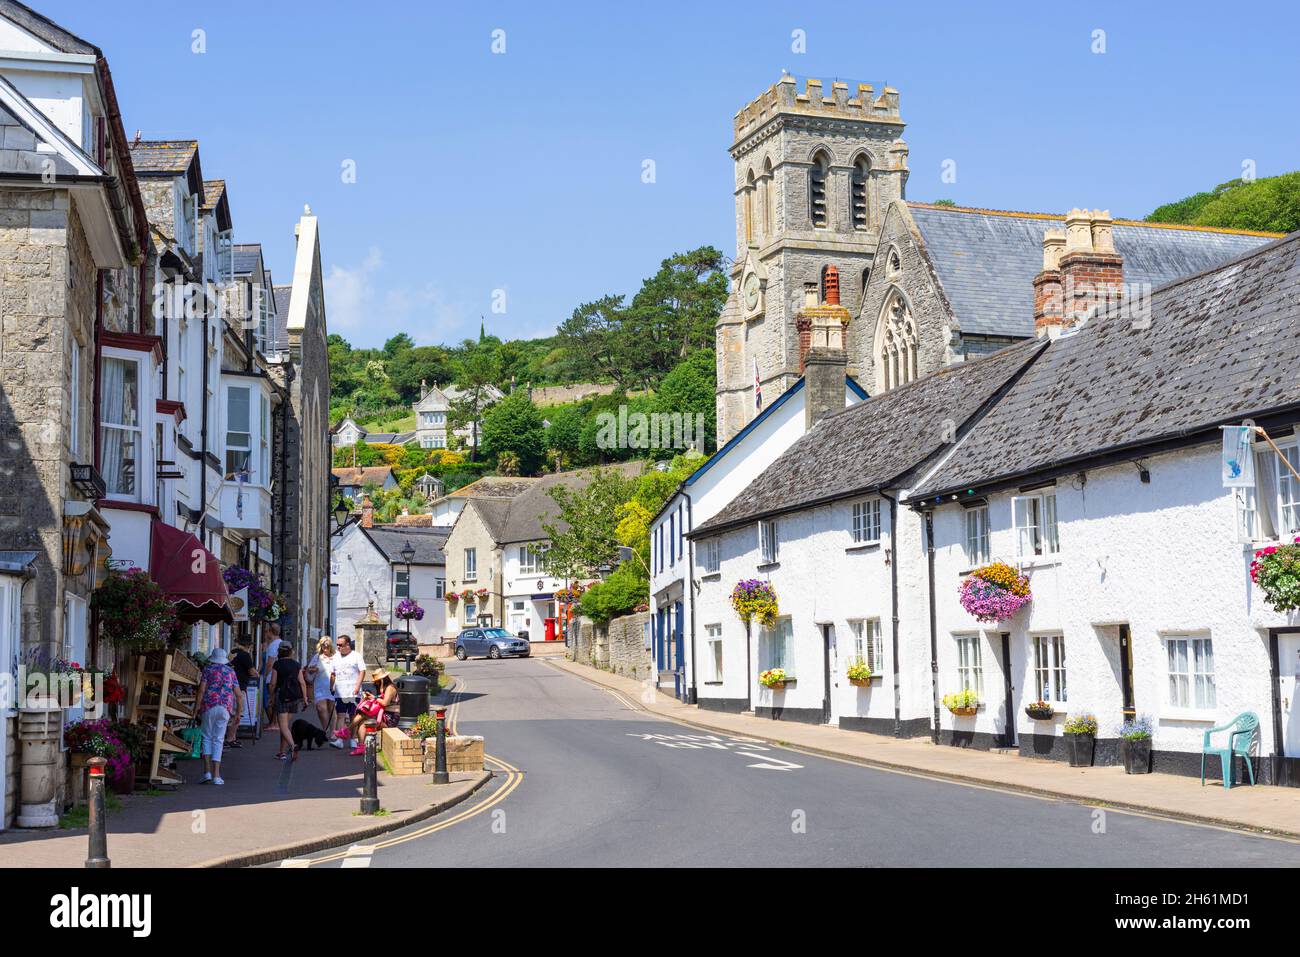 St Michael's Church and other small shops on Fore Street Beer Village centre Devon England UK GB Europe Stock Photo